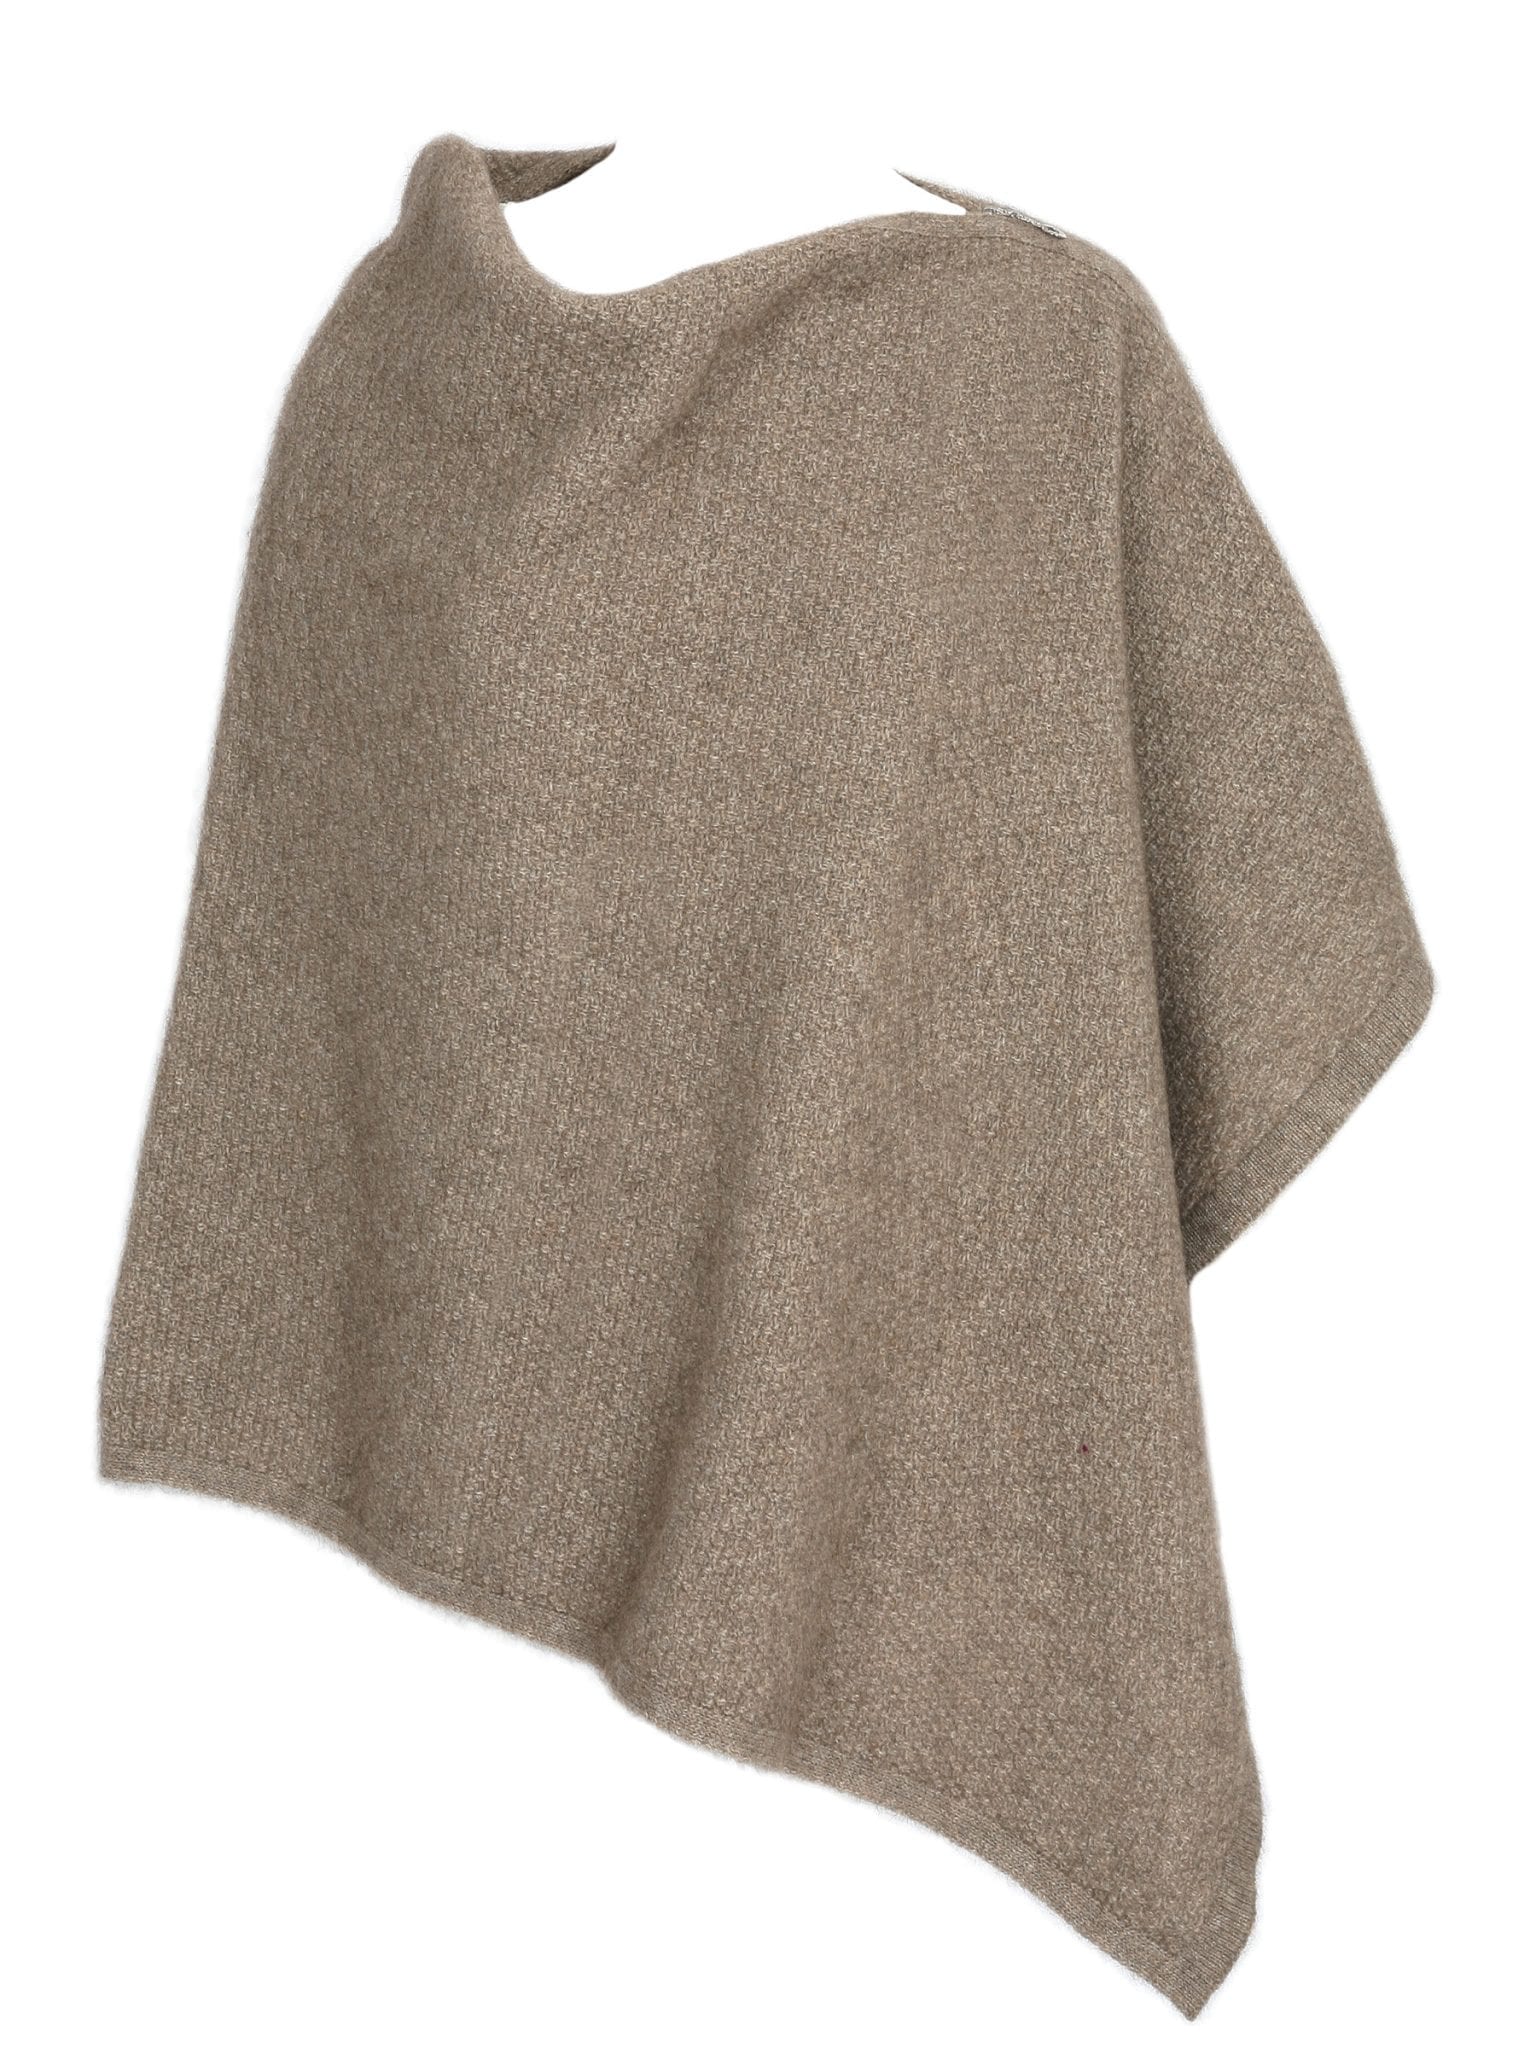 A beautiful textured wrap that can be worn several ways - as a poncho with the zip over the shoulder, zip to the front like a cape, as a wrap or scarf and if you feel a bit daring, a skirt! Available in 12 colourways. Made in NZ by Lothlorian. Natural.